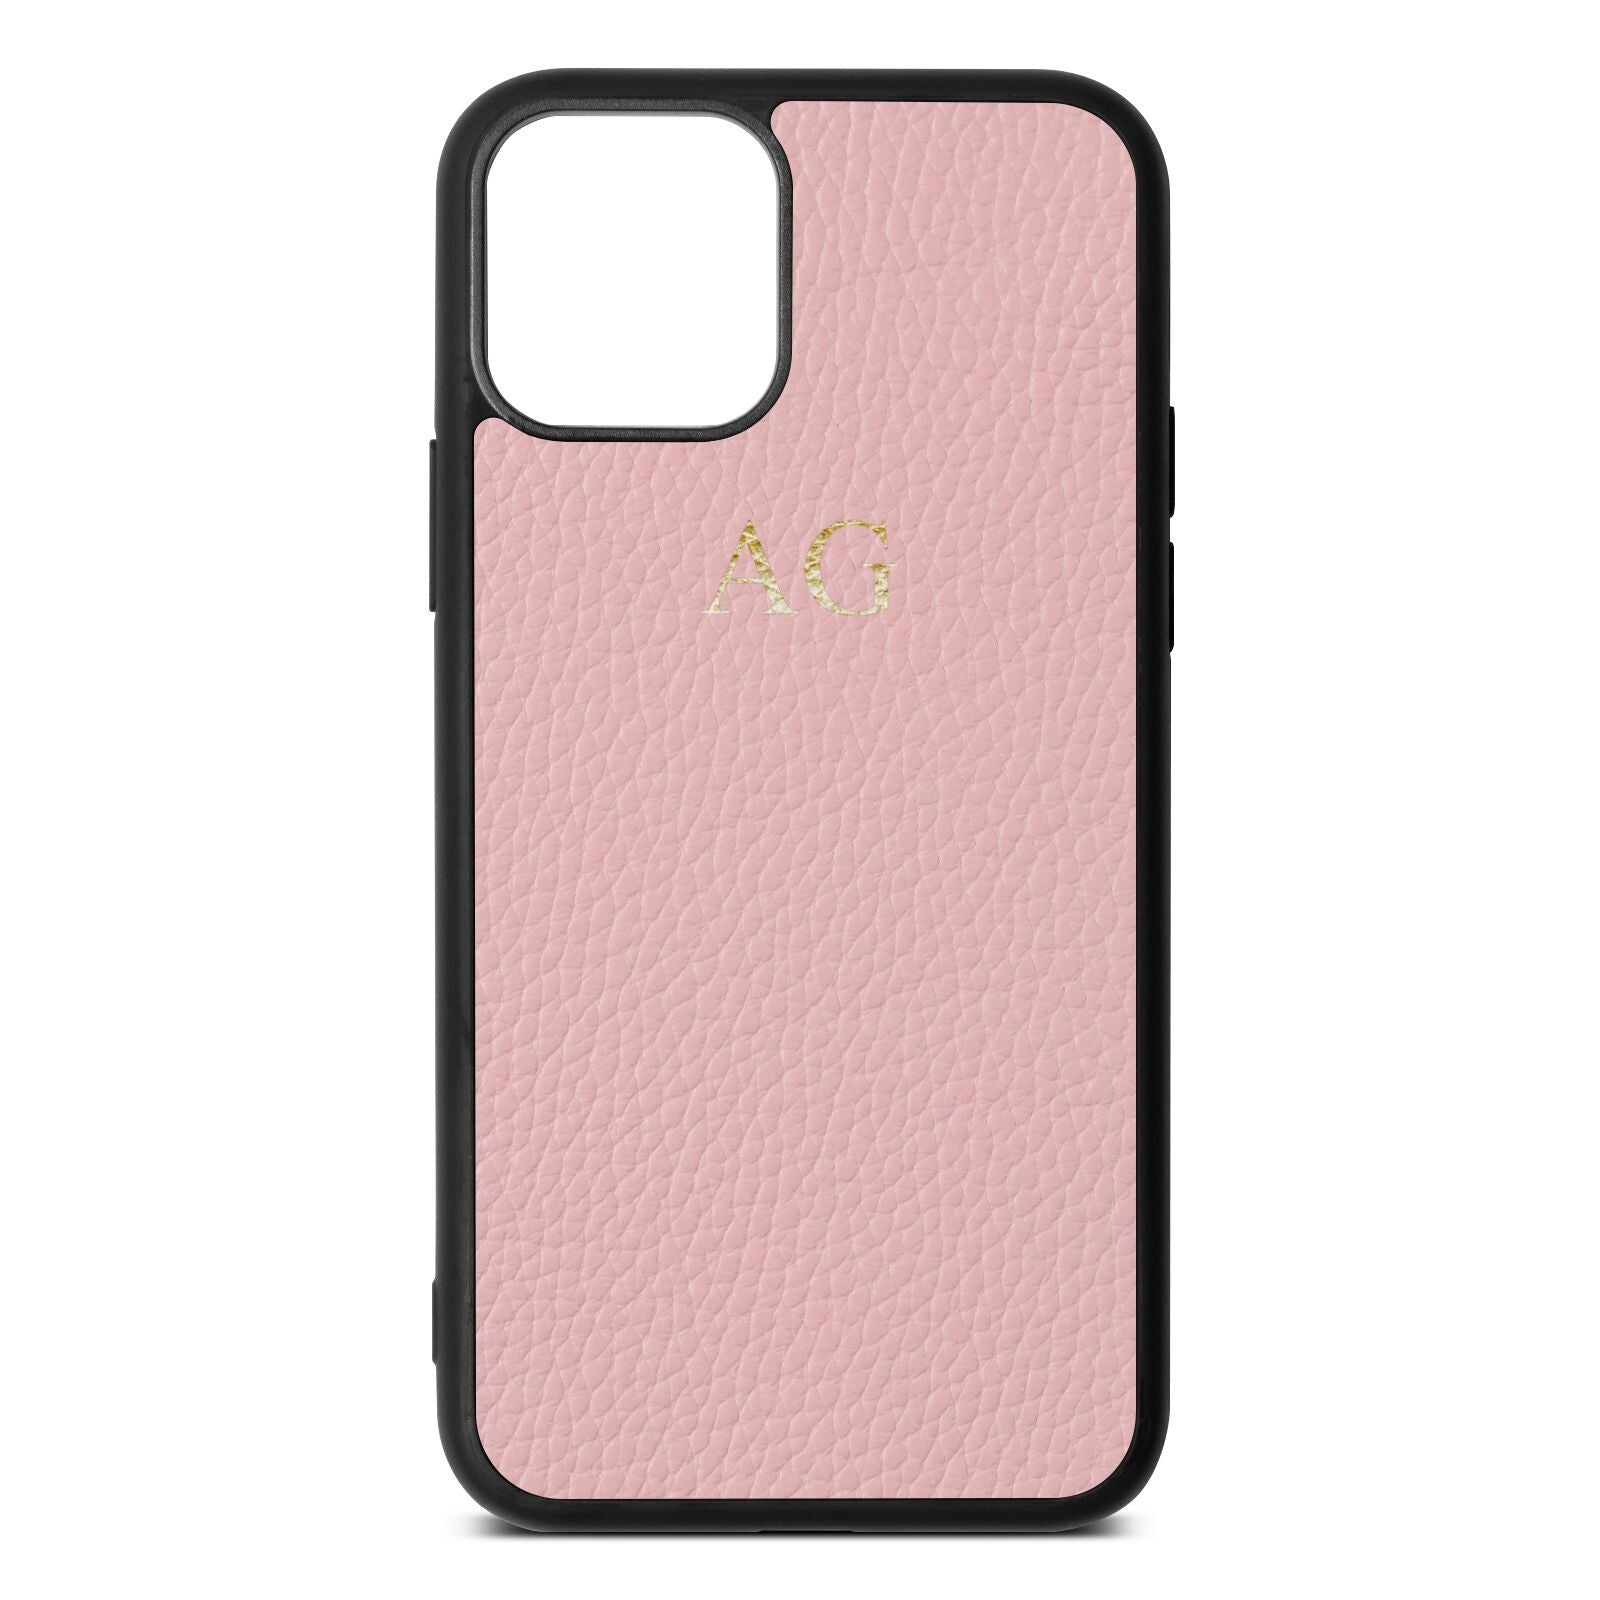 Personalised Pink Pebble Leather iPhone 11 Case